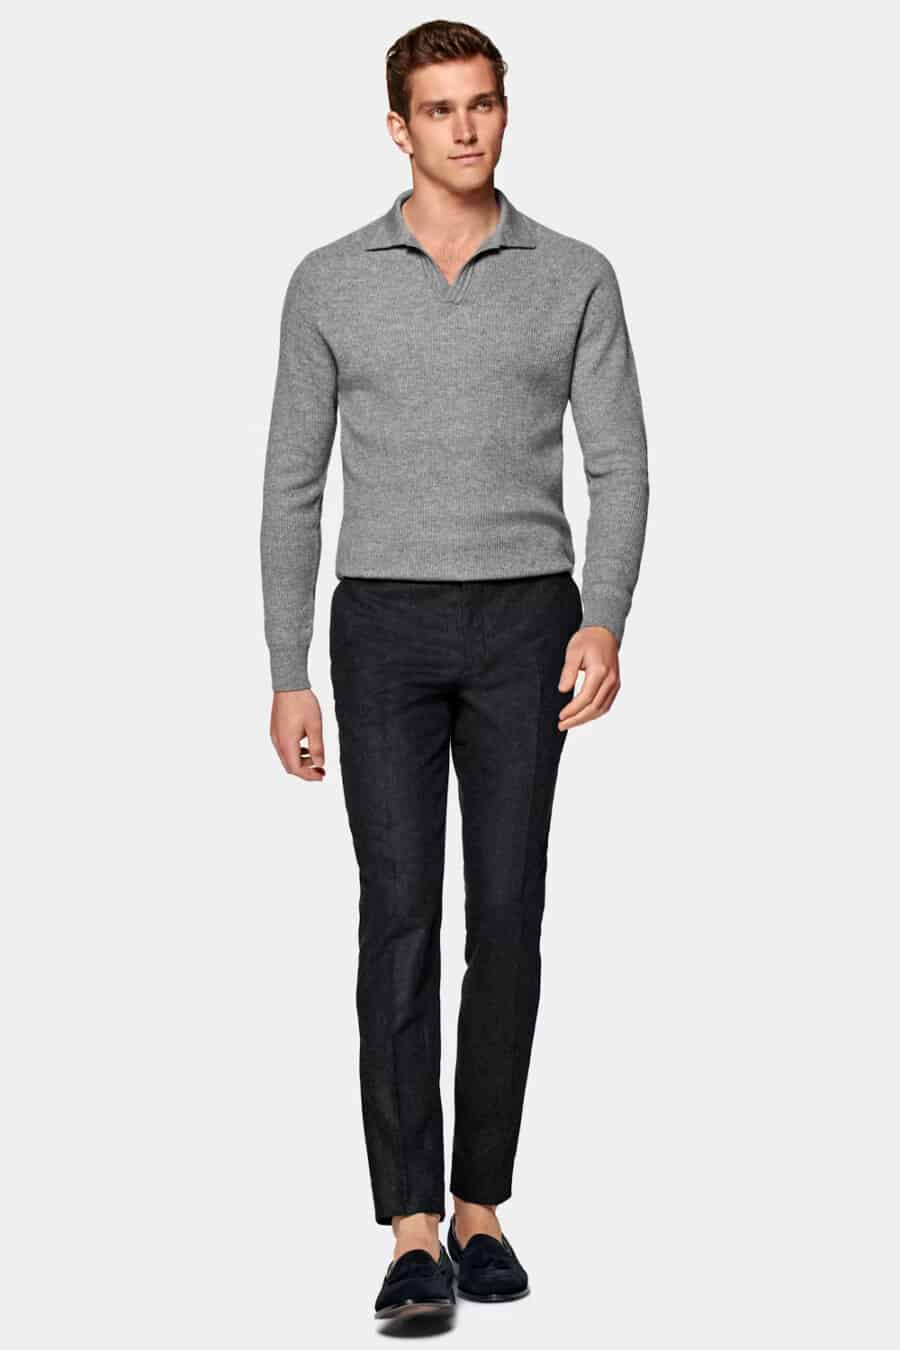 Men's charcoal wool pants, knitted grey long-sleeved polo shirt and suede loafers outfit